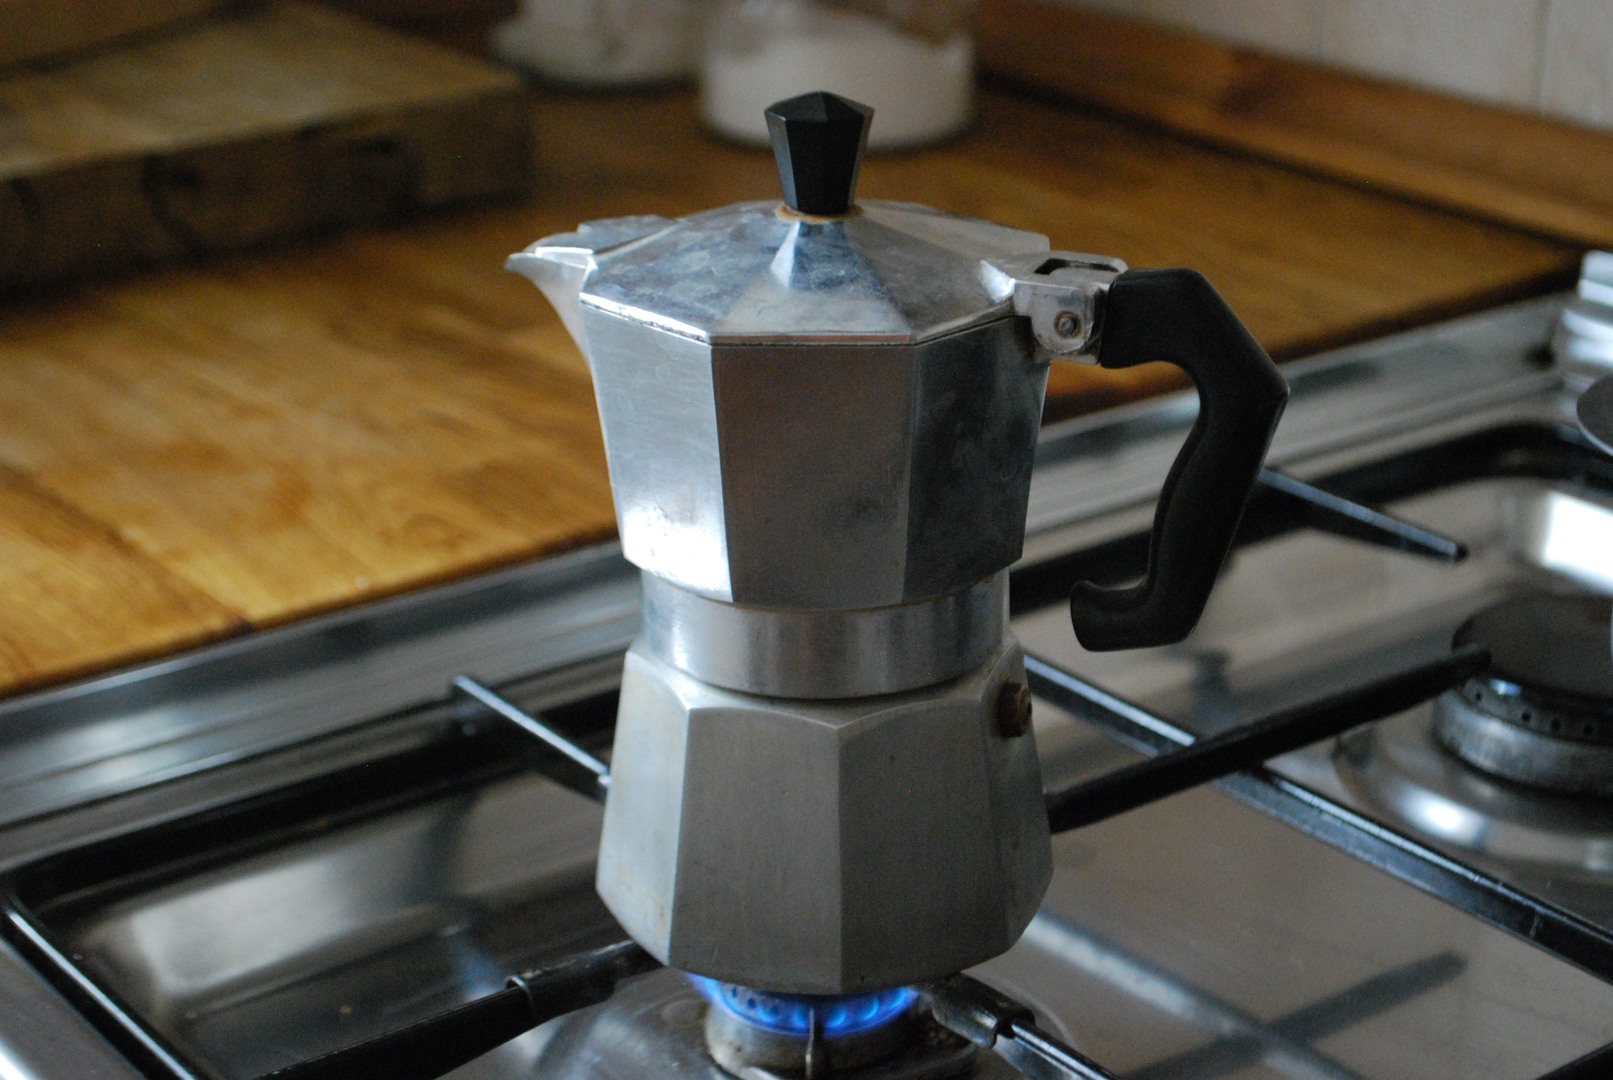 How does a moka pot work?  The simple science behind stove-top coffee